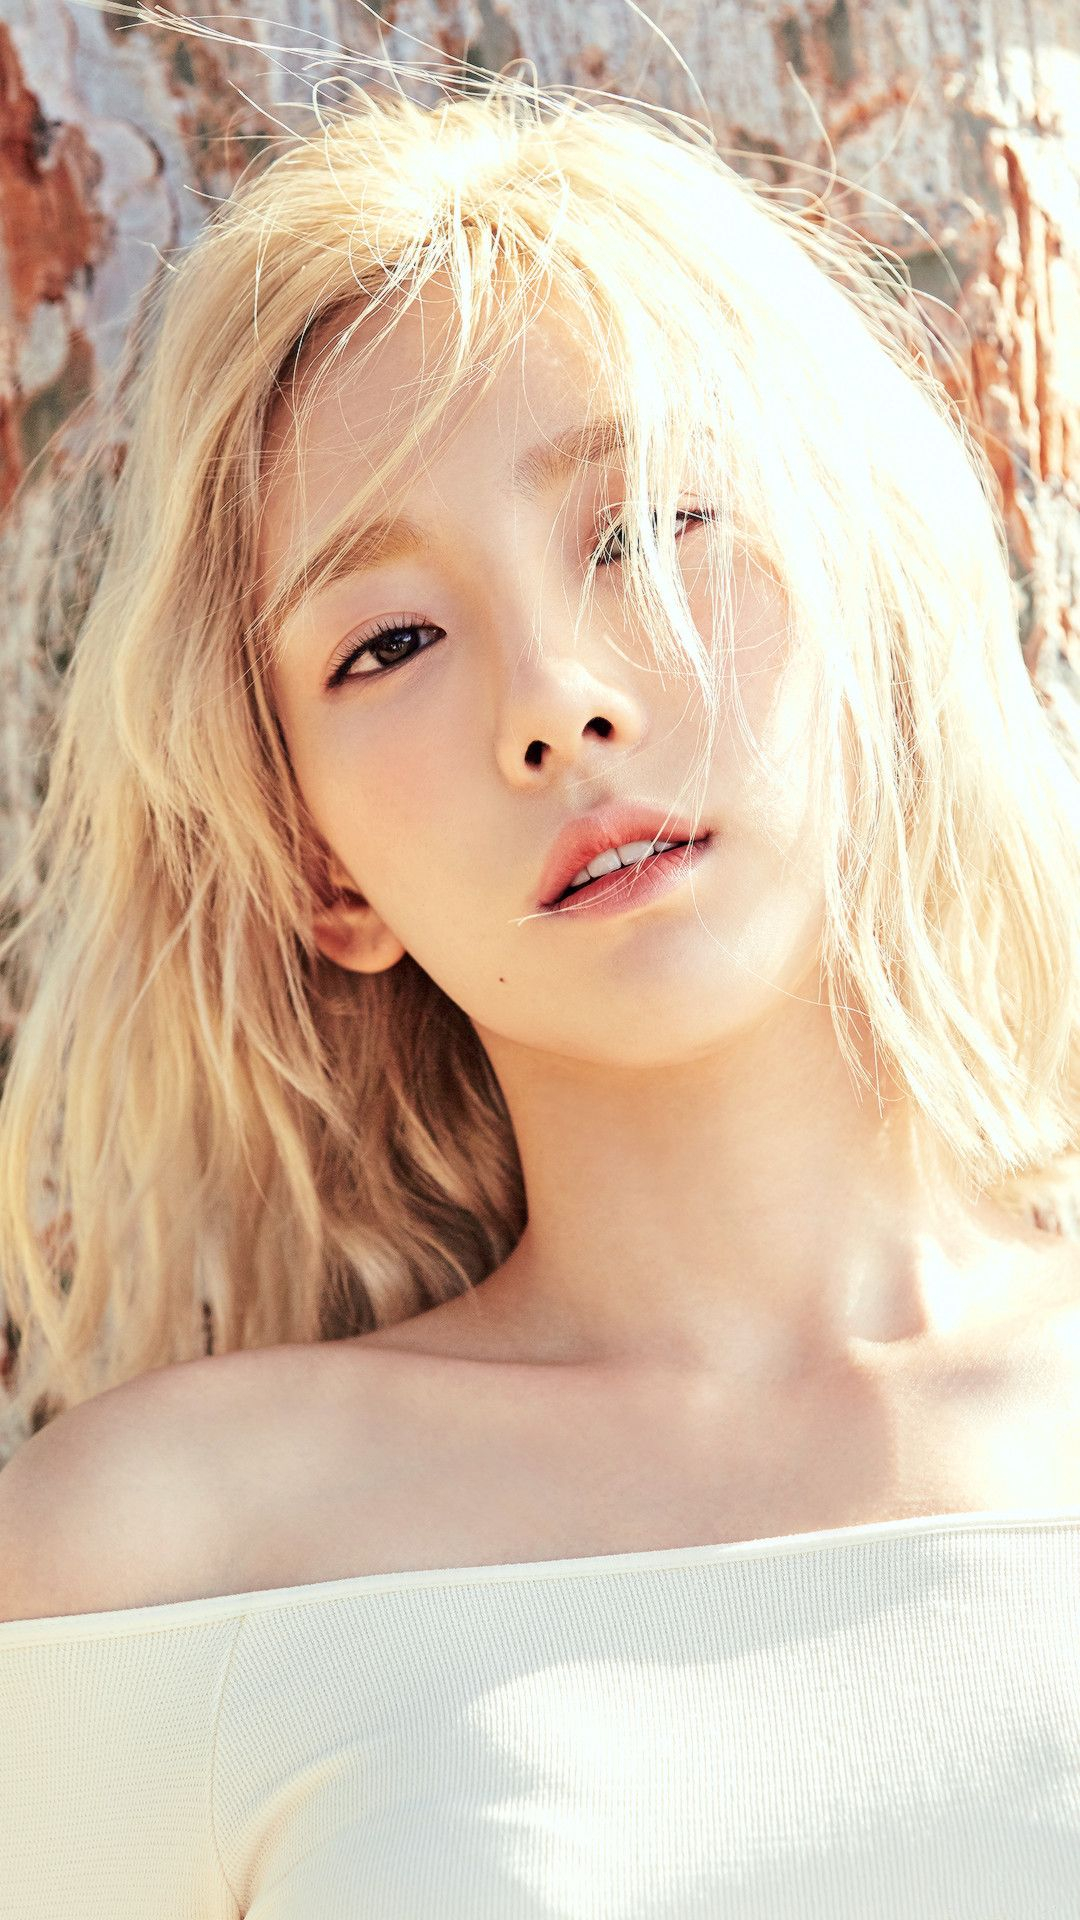 1080x1920 Snsd Taeyeon Wallpapers Top Free Snsd Taeyeon Backgrounds